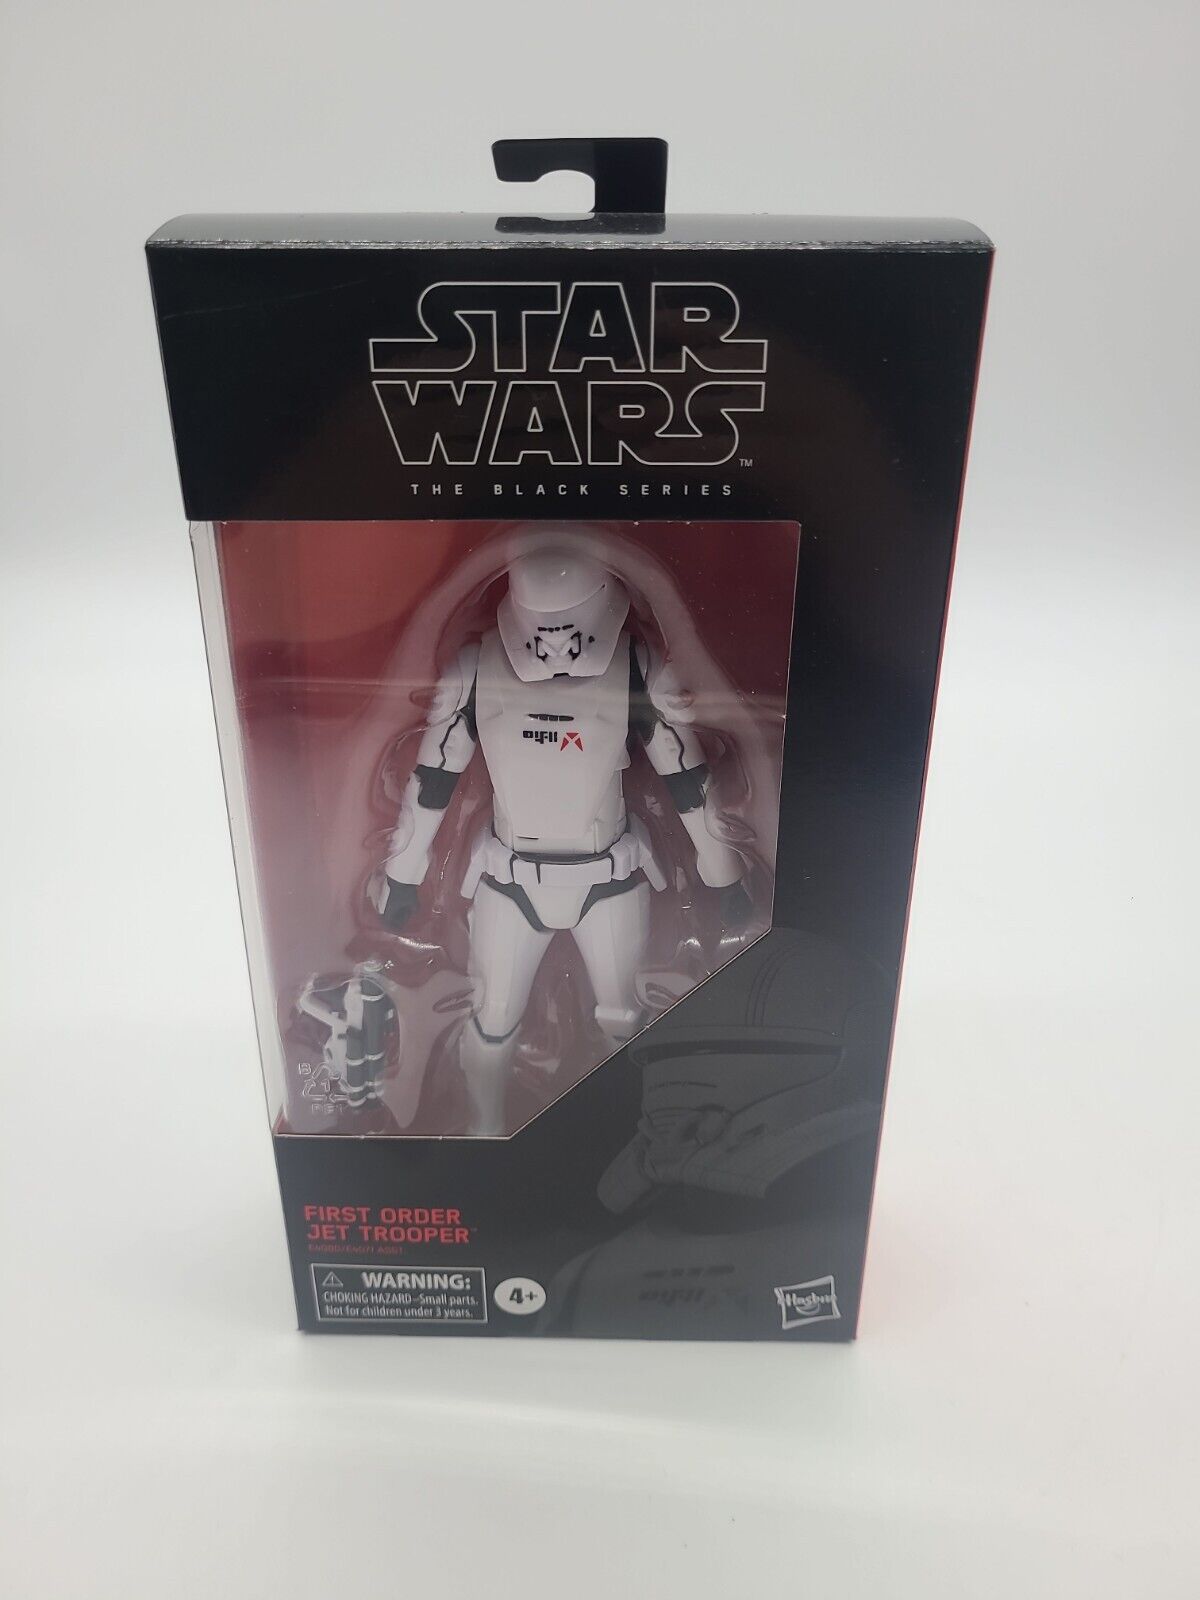 Hasbro Star Wars The Black Series First Order Jet Trooper Toy Action Figure